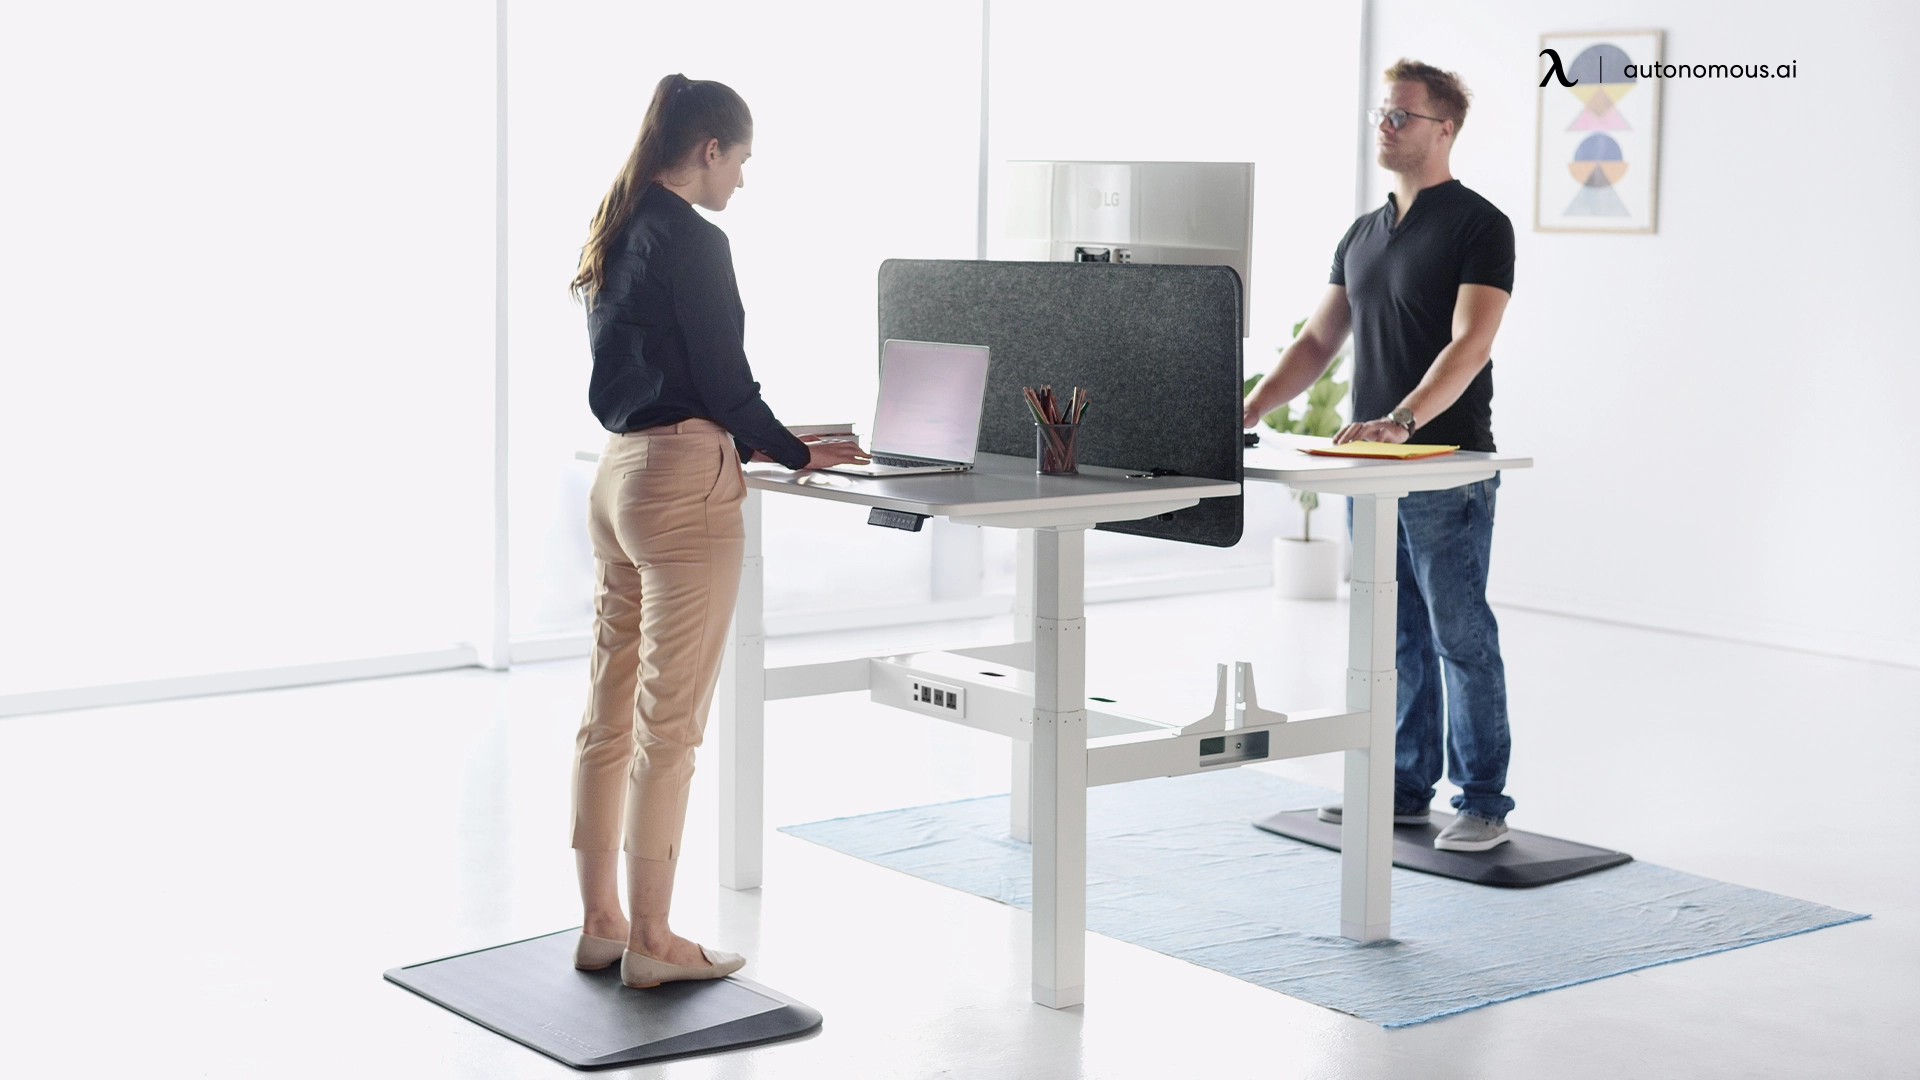 How to Stand in the Right Way - Ergonomics Guide